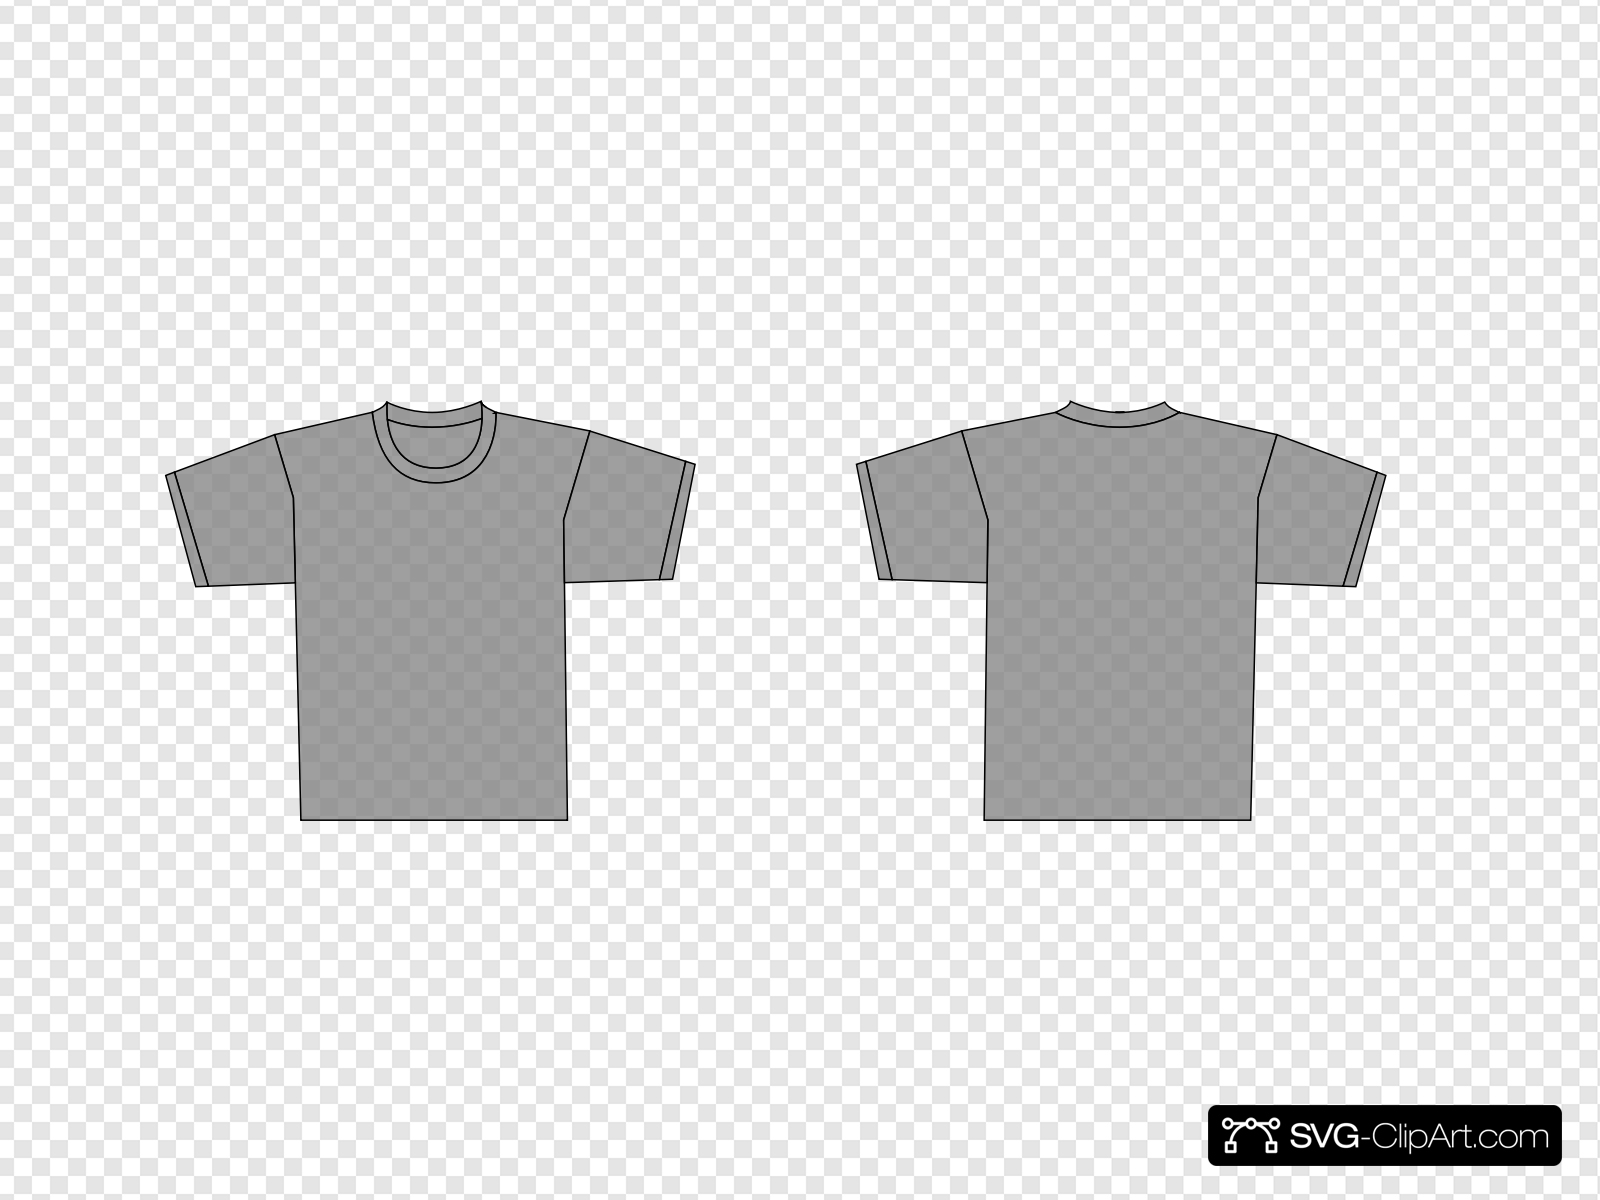 Grey T Shirt Template Clip art, Icon and SVG.